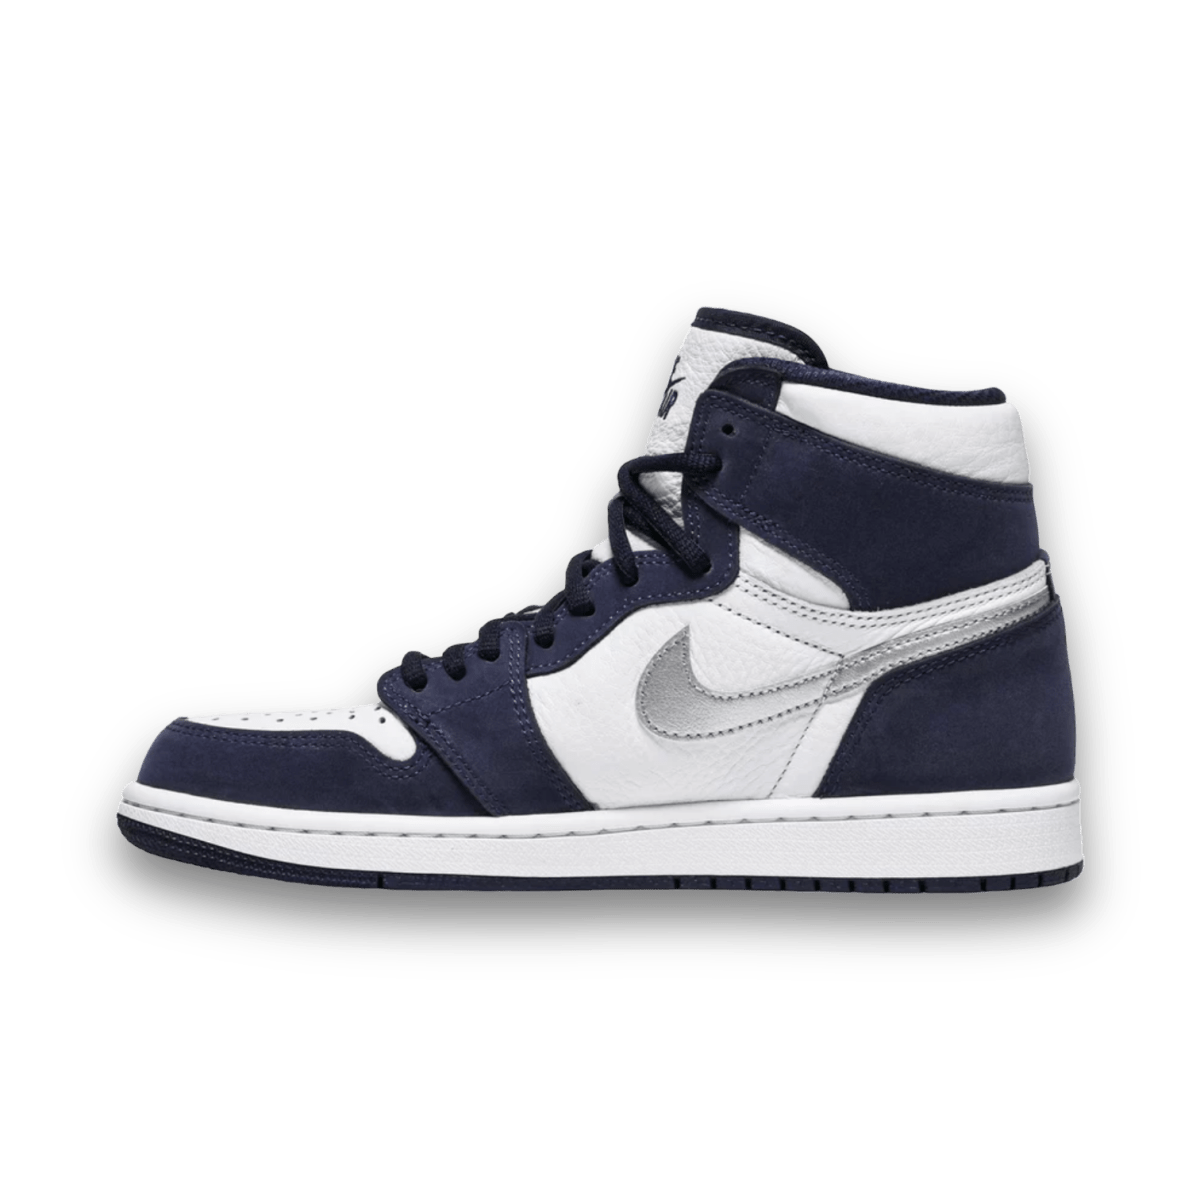 Laces for Lions Air Jordan 1 Retro High 'Midnight Navy' - High Sneaker - Jawns on Fire Sneakers & Streetwear